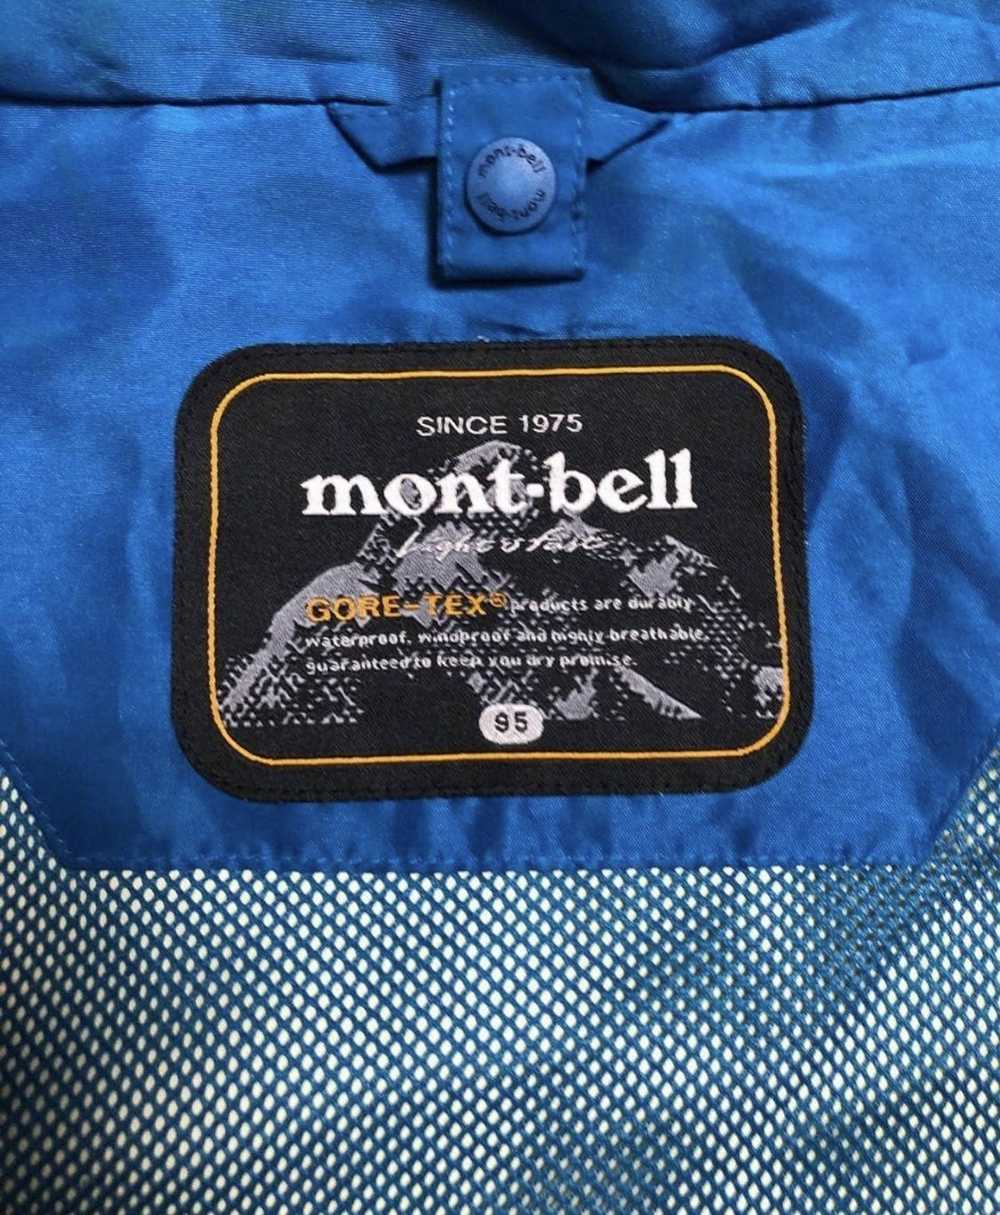 Montbell Montbell GoreTex - image 7